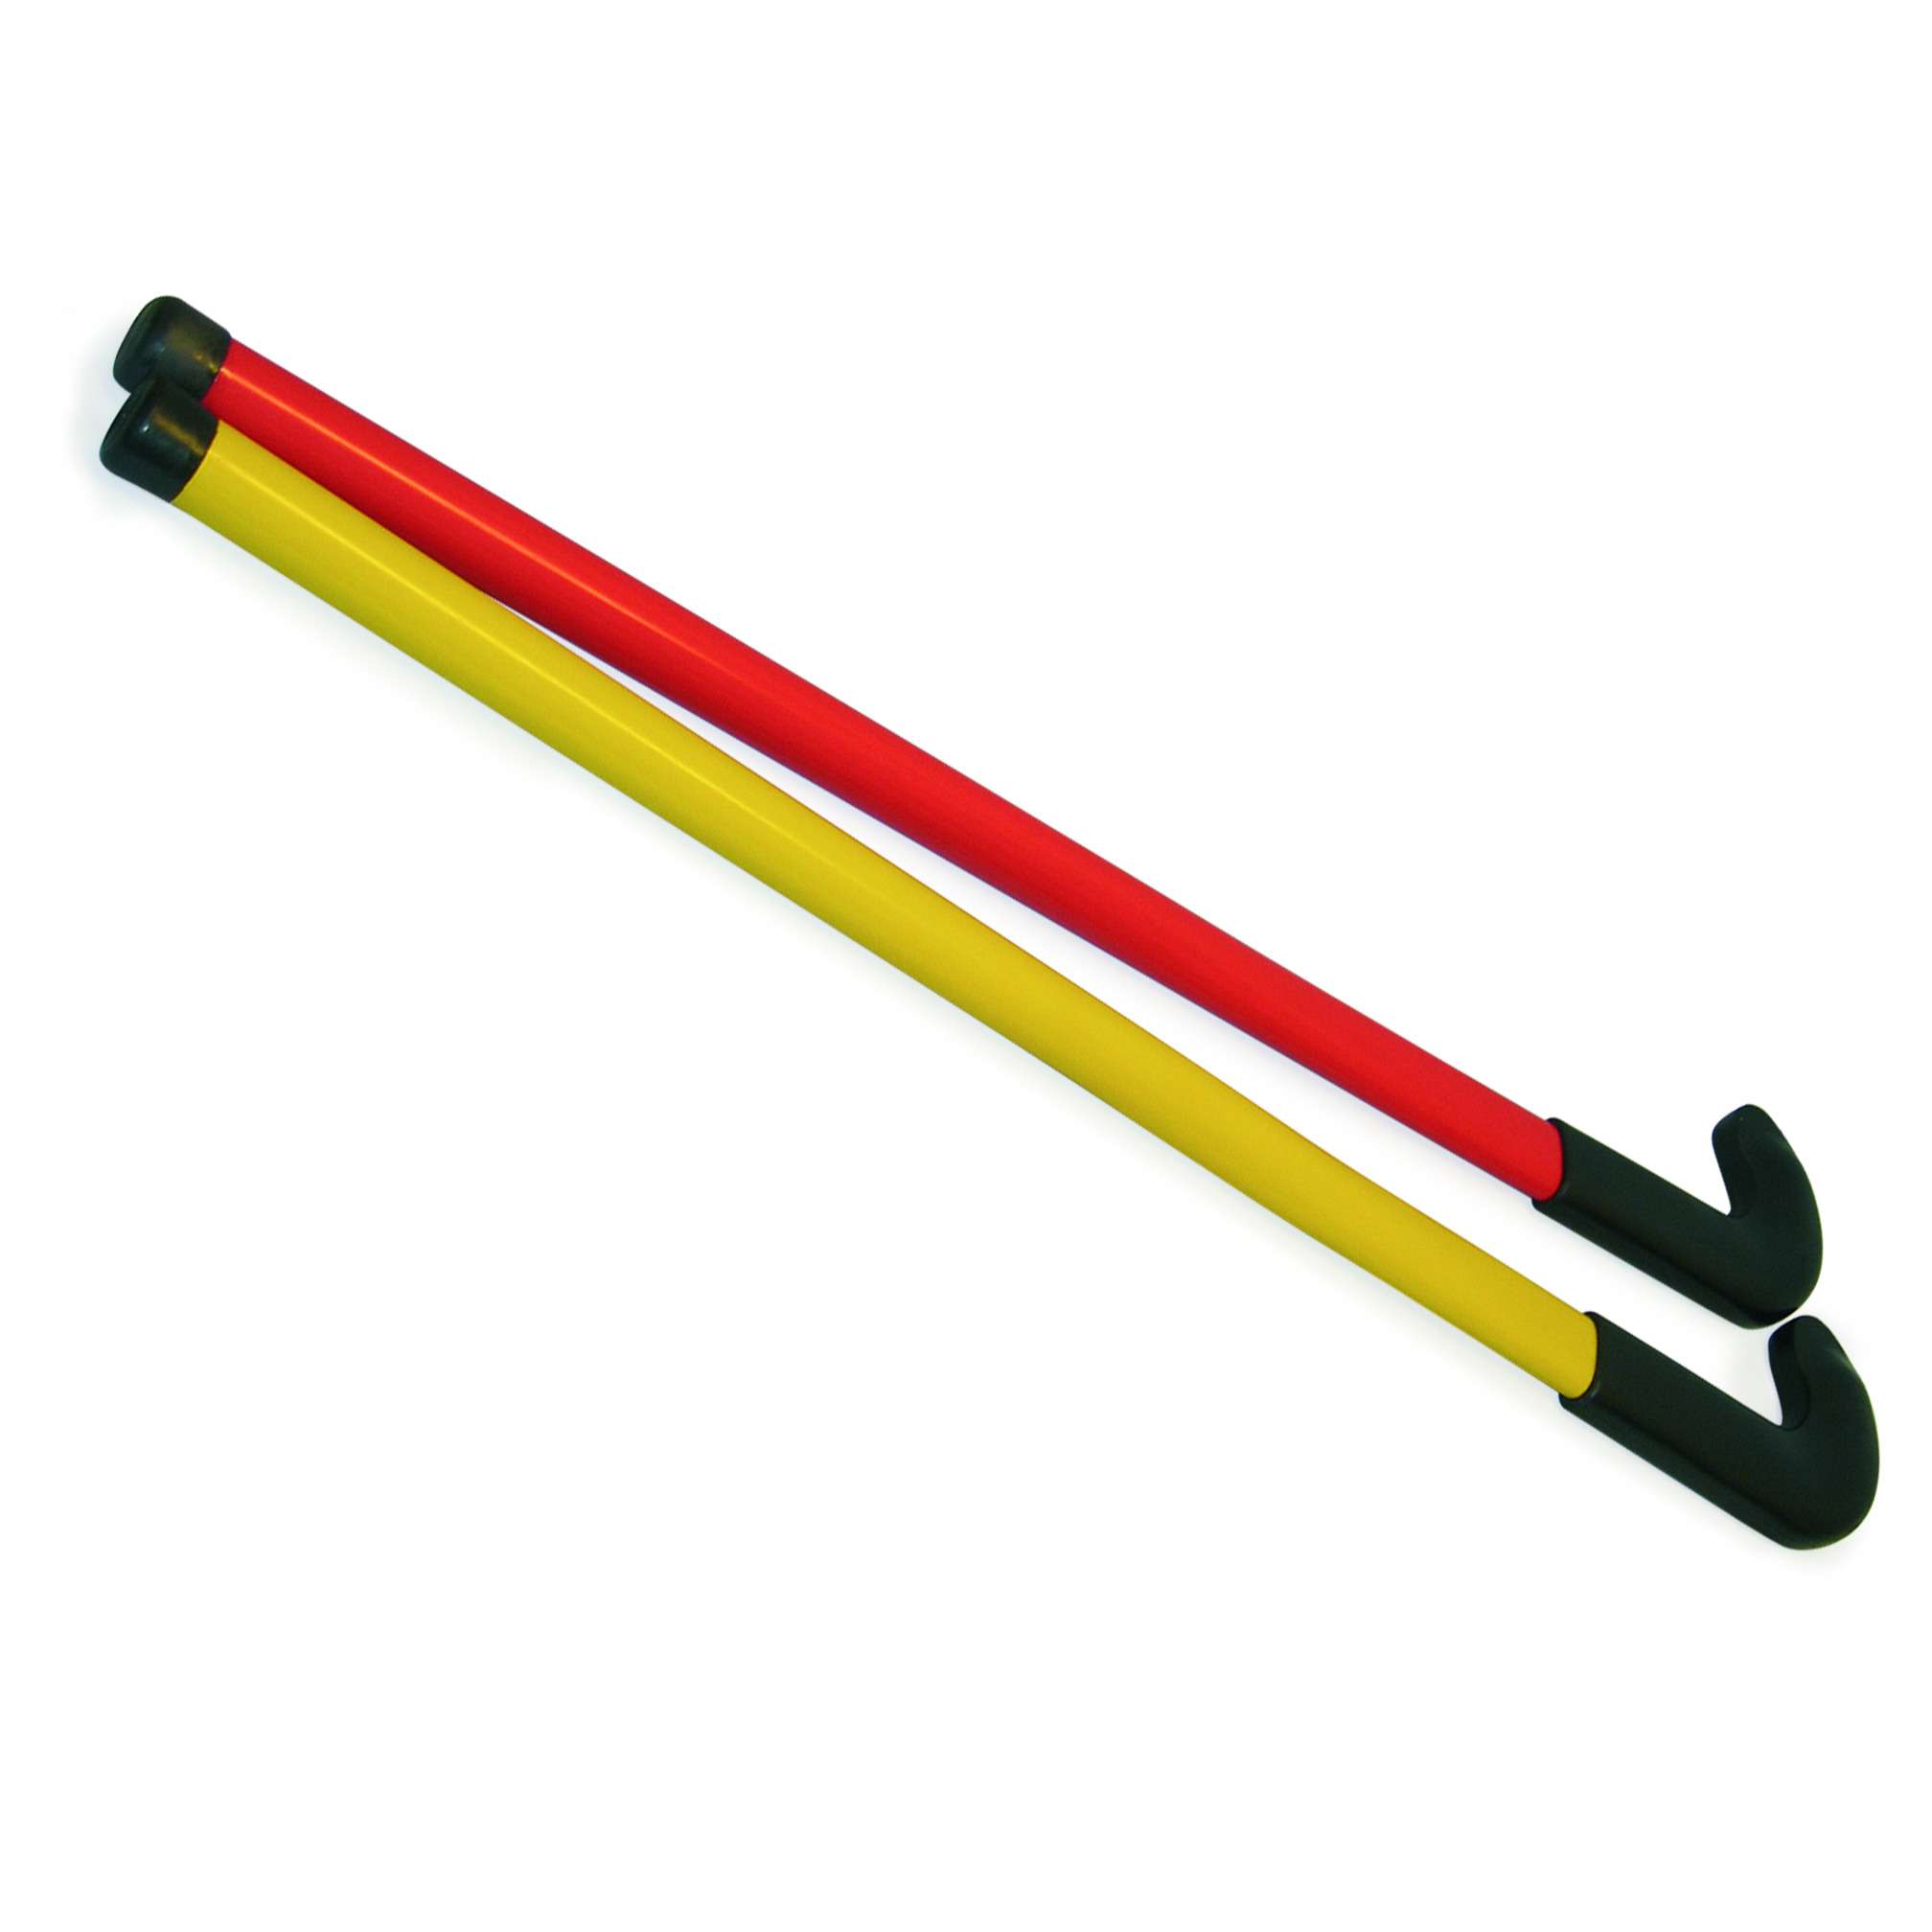 Plastic hockey stick with flat and convex side, red